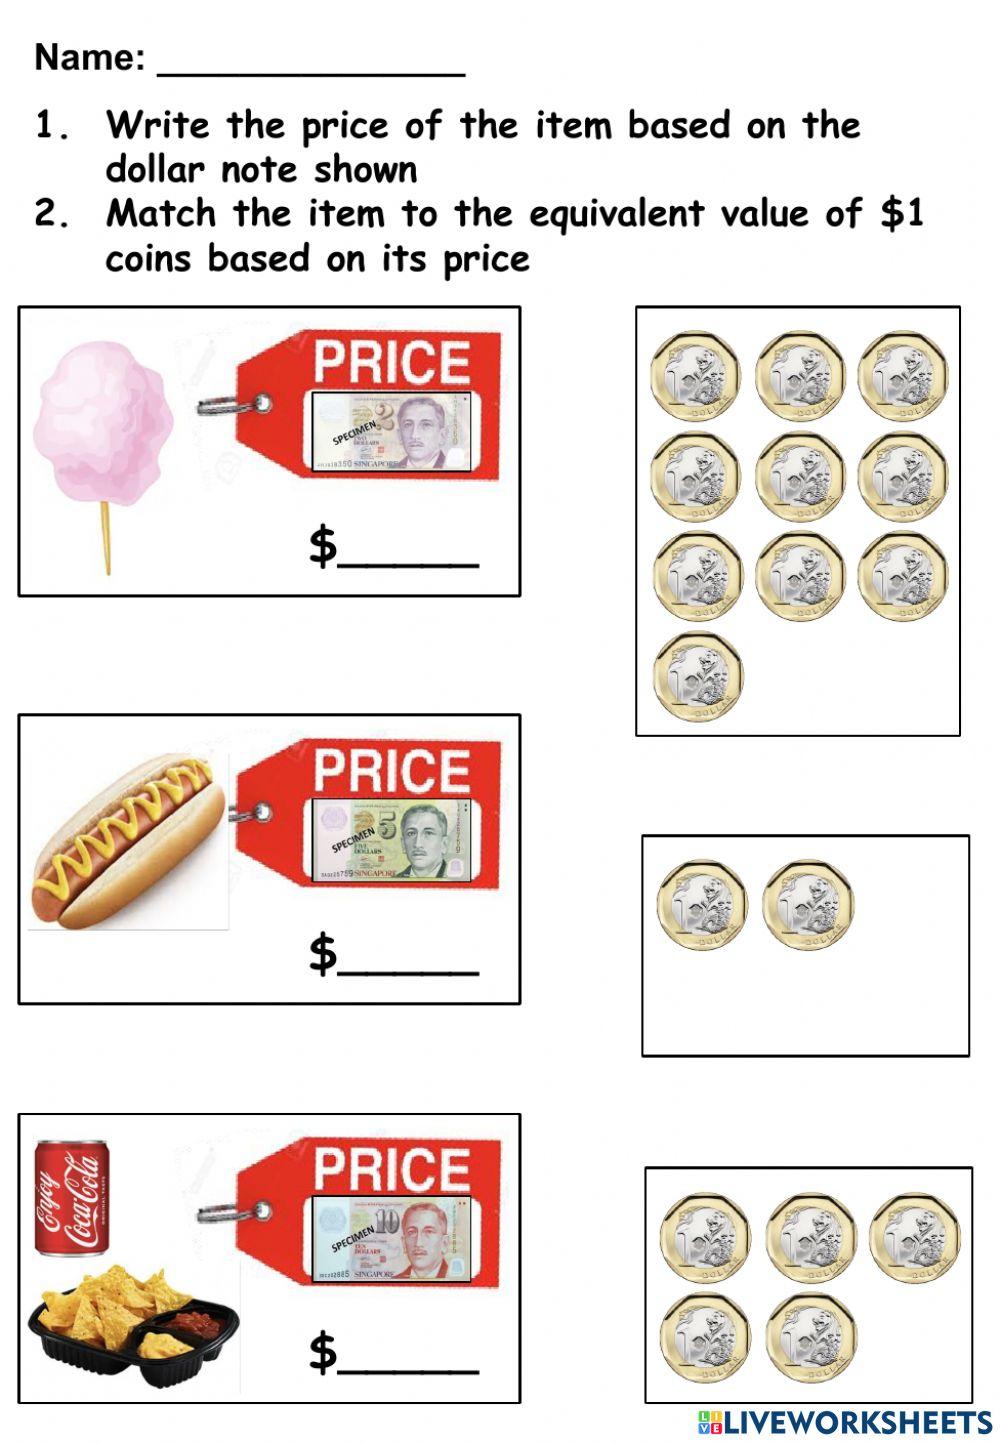 Dollar notes and equivalent group of -1 coins